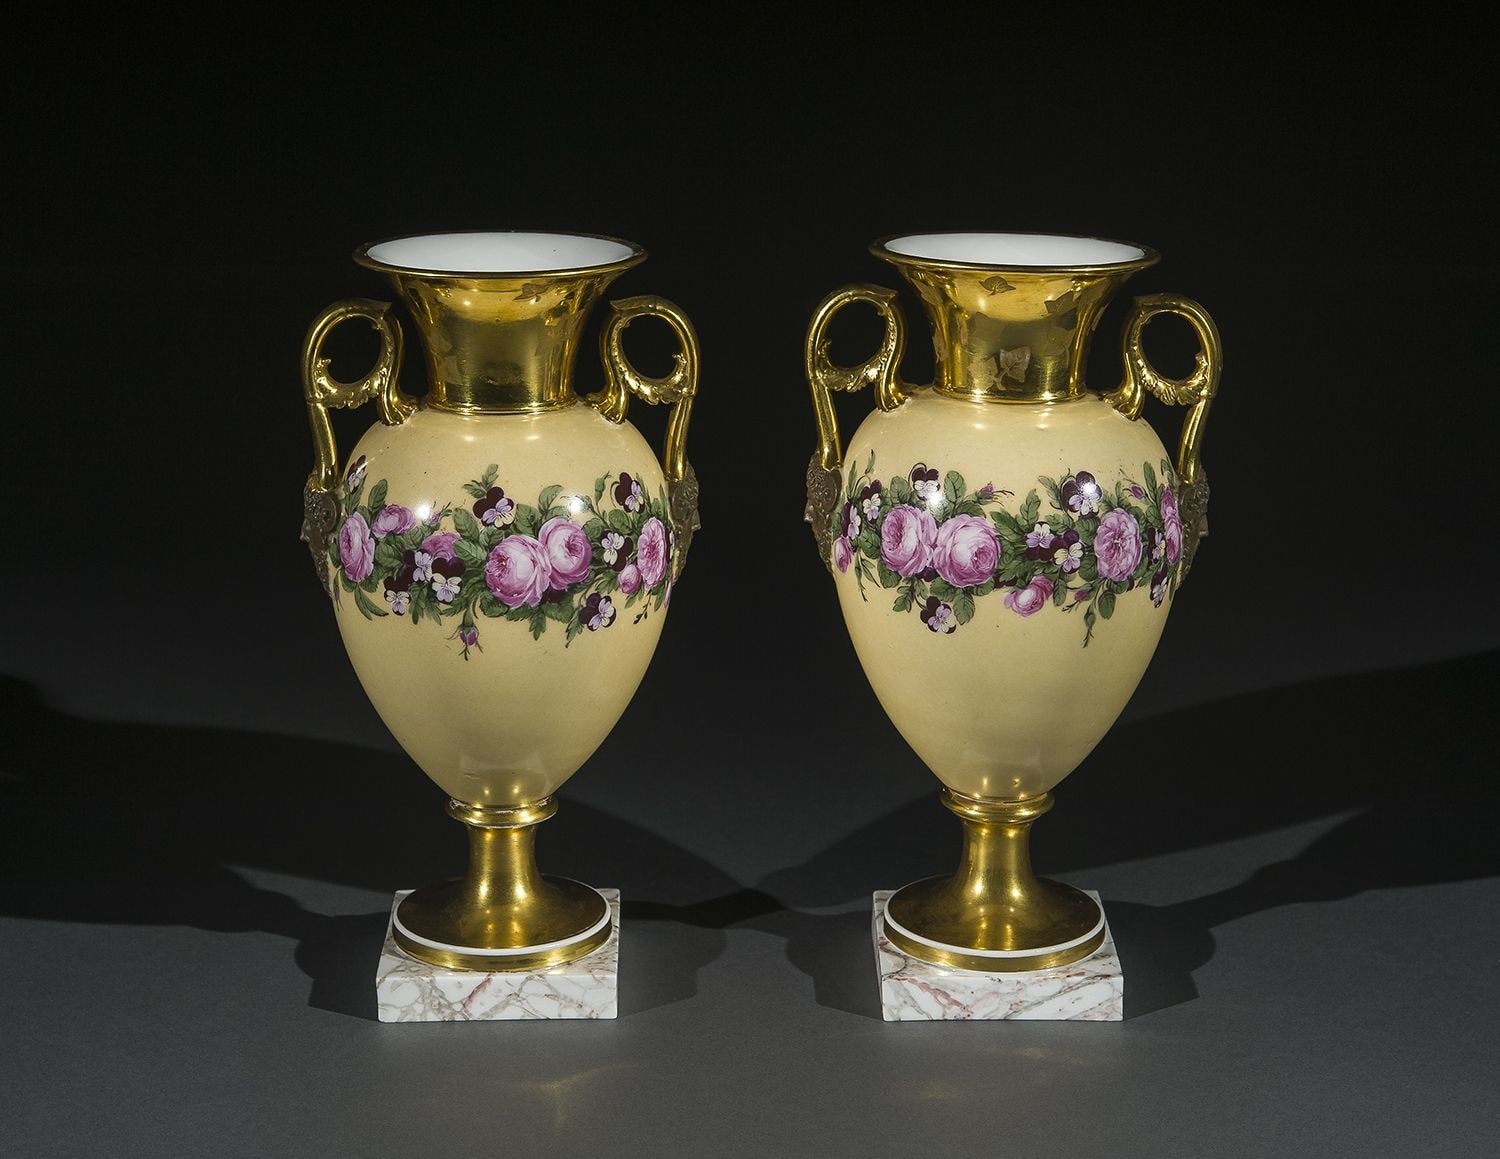 Pair &ldquo;Old Paris&rdquo; Porcelain Vases with Yellow Ground and Garlands of Flowers,&nbsp;about 1816&ndash;20Dagoty &amp;amp; Honor&eacute;, Paris&nbsp;Porcelain, painted and gilded, with iron tie-rods (for assembly)11 3/8 in. high
